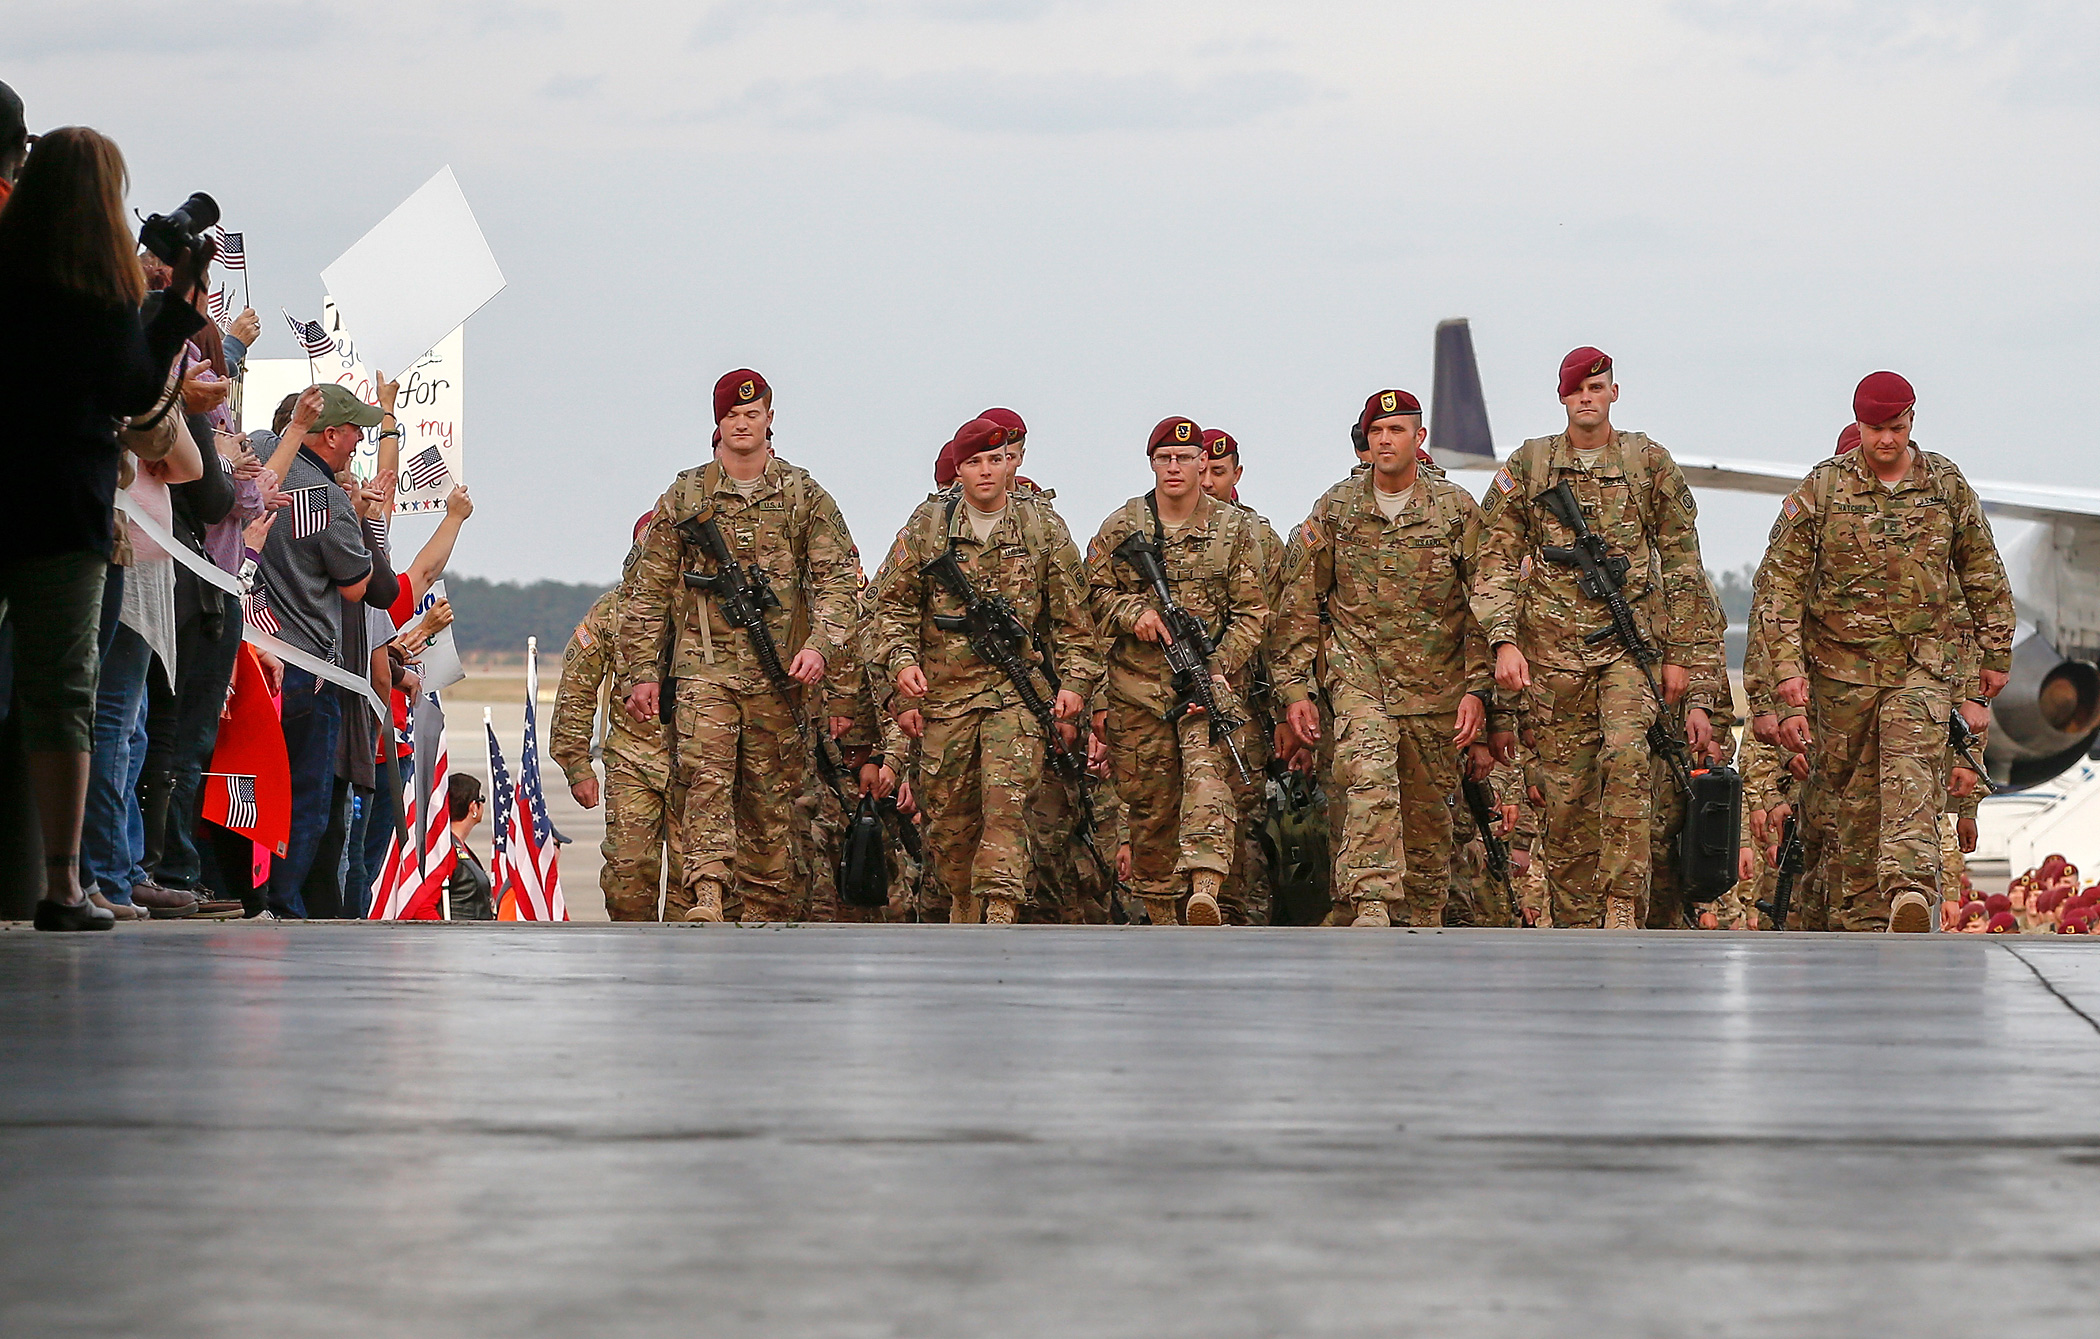 Paratroopers march up the ramp as they return home from Afghanistan at Pope Army Airfield in Fort Bragg, North Carolina